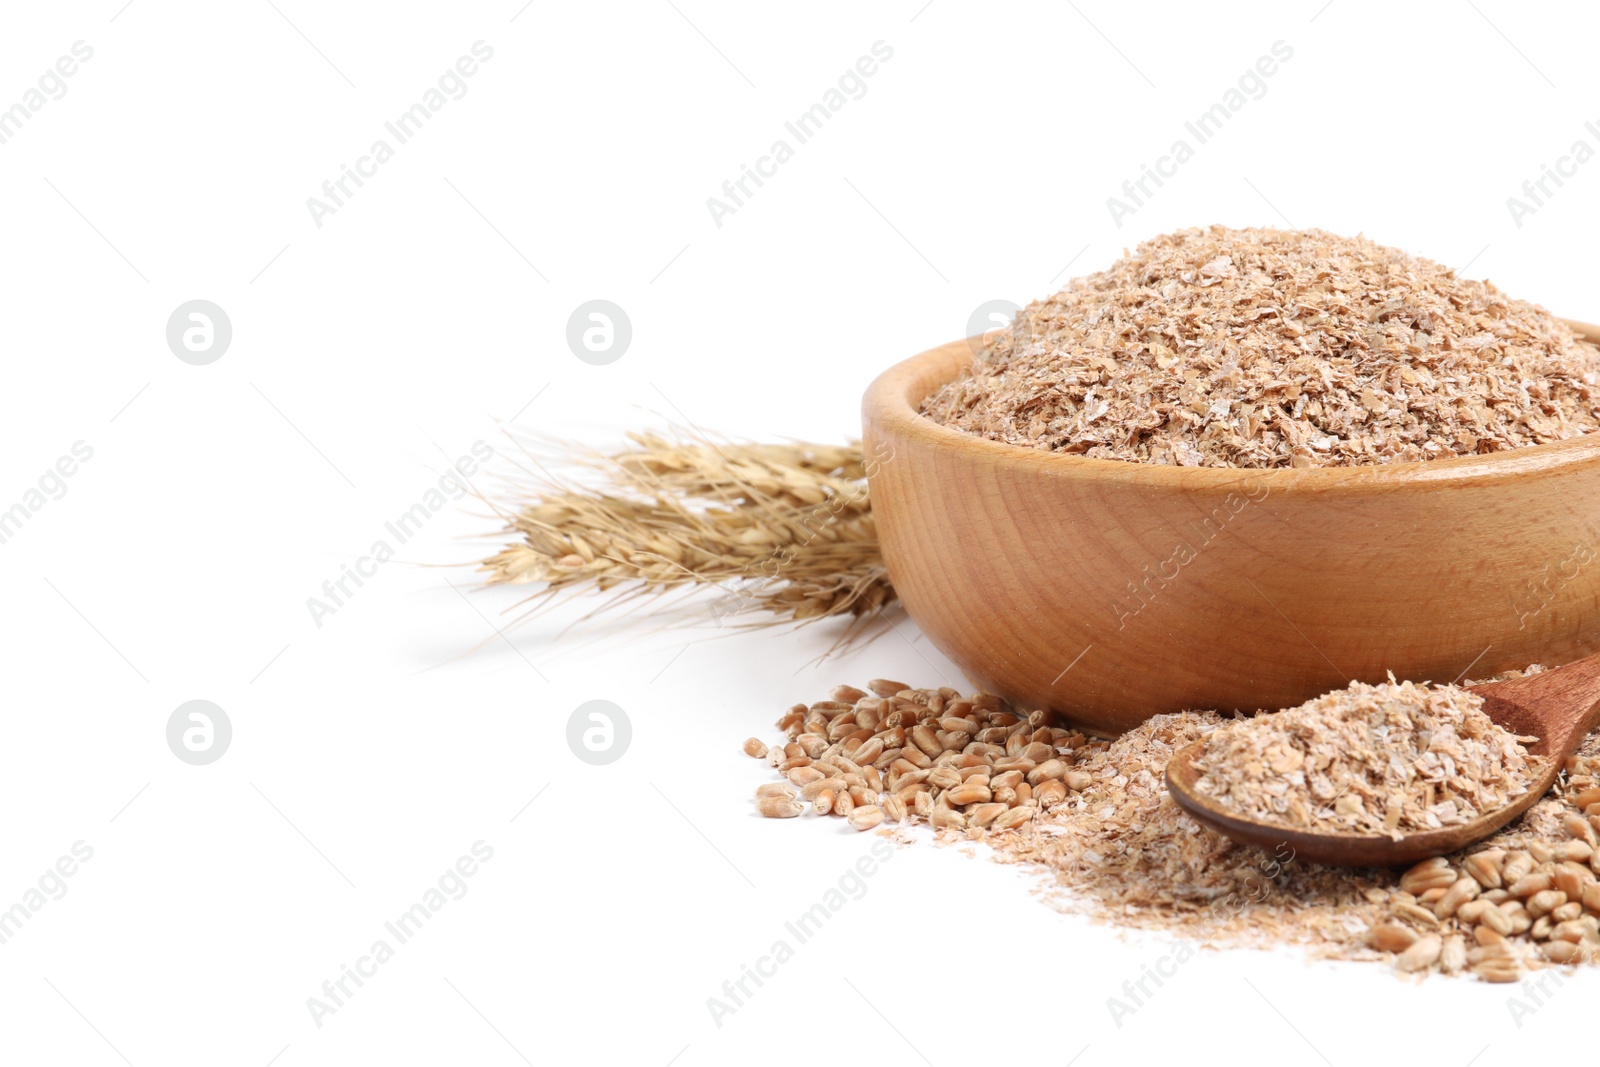 Photo of Wheat bran and spikelets on white background